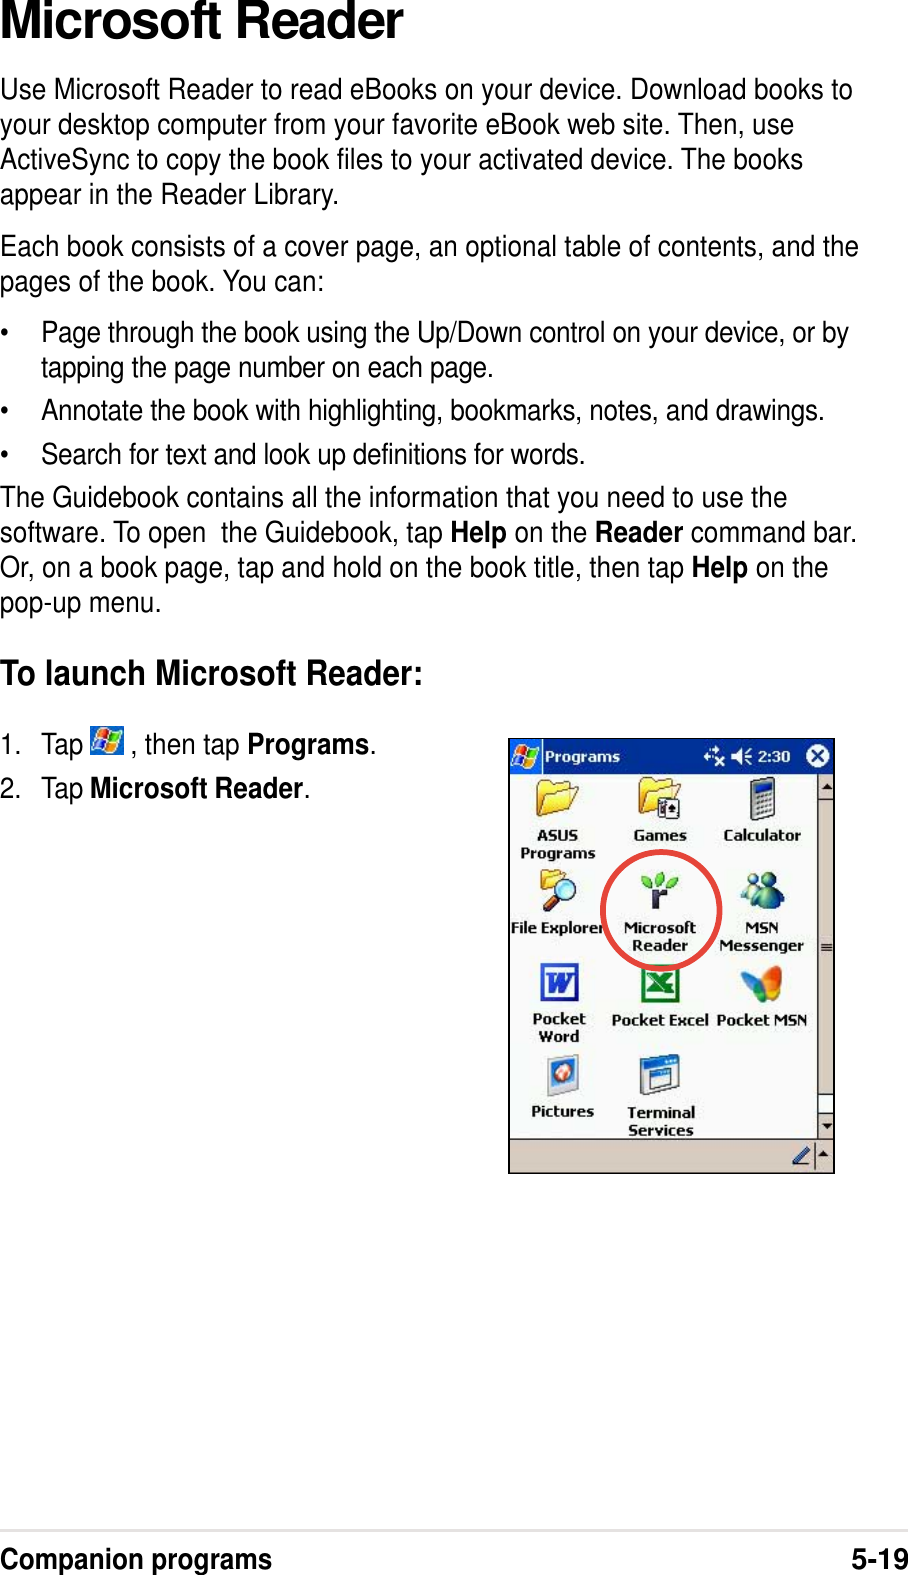 Companion programs5-19Microsoft ReaderUse Microsoft Reader to read eBooks on your device. Download books toyour desktop computer from your favorite eBook web site. Then, useActiveSync to copy the book files to your activated device. The booksappear in the Reader Library.Each book consists of a cover page, an optional table of contents, and thepages of the book. You can:•Page through the book using the Up/Down control on your device, or bytapping the page number on each page.•Annotate the book with highlighting, bookmarks, notes, and drawings.•Search for text and look up definitions for words.The Guidebook contains all the information that you need to use thesoftware. To open  the Guidebook, tap Help on the Reader command bar.Or, on a book page, tap and hold on the book title, then tap Help on thepop-up menu.To launch Microsoft Reader:1. Tap   , then tap Programs.2. Tap Microsoft Reader.